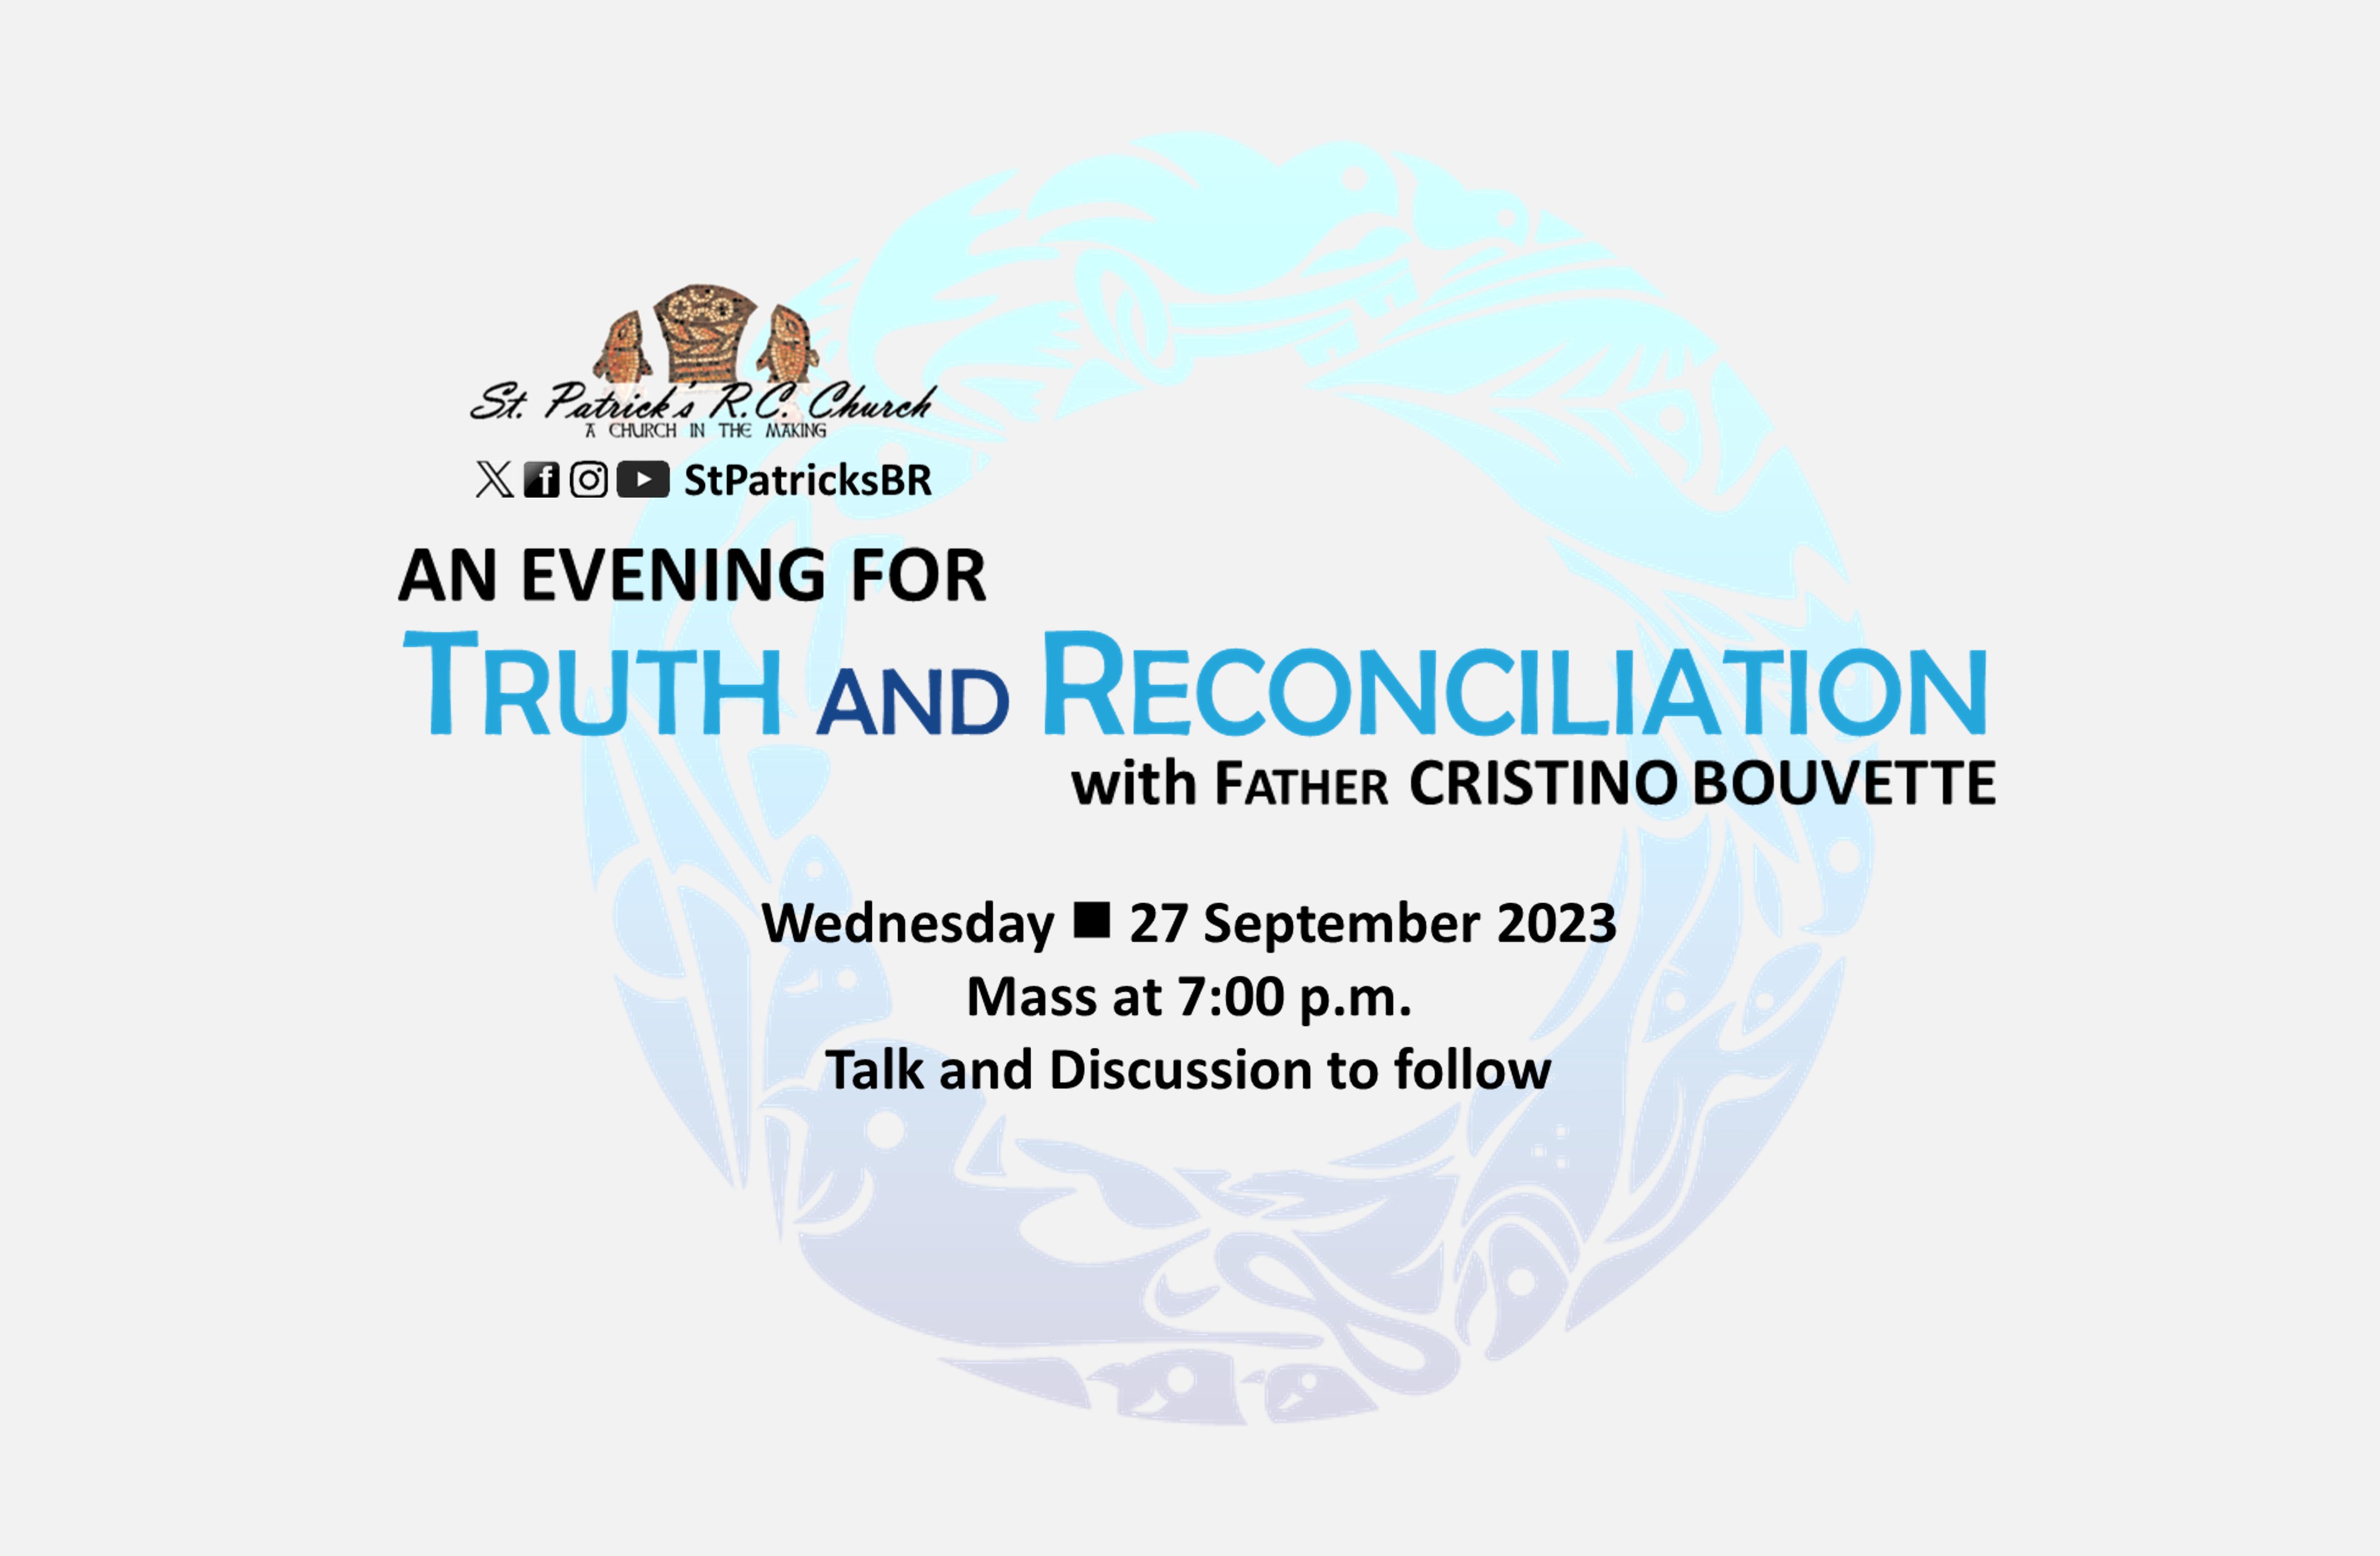 CTA: An Evening for Truth and Reconciliation